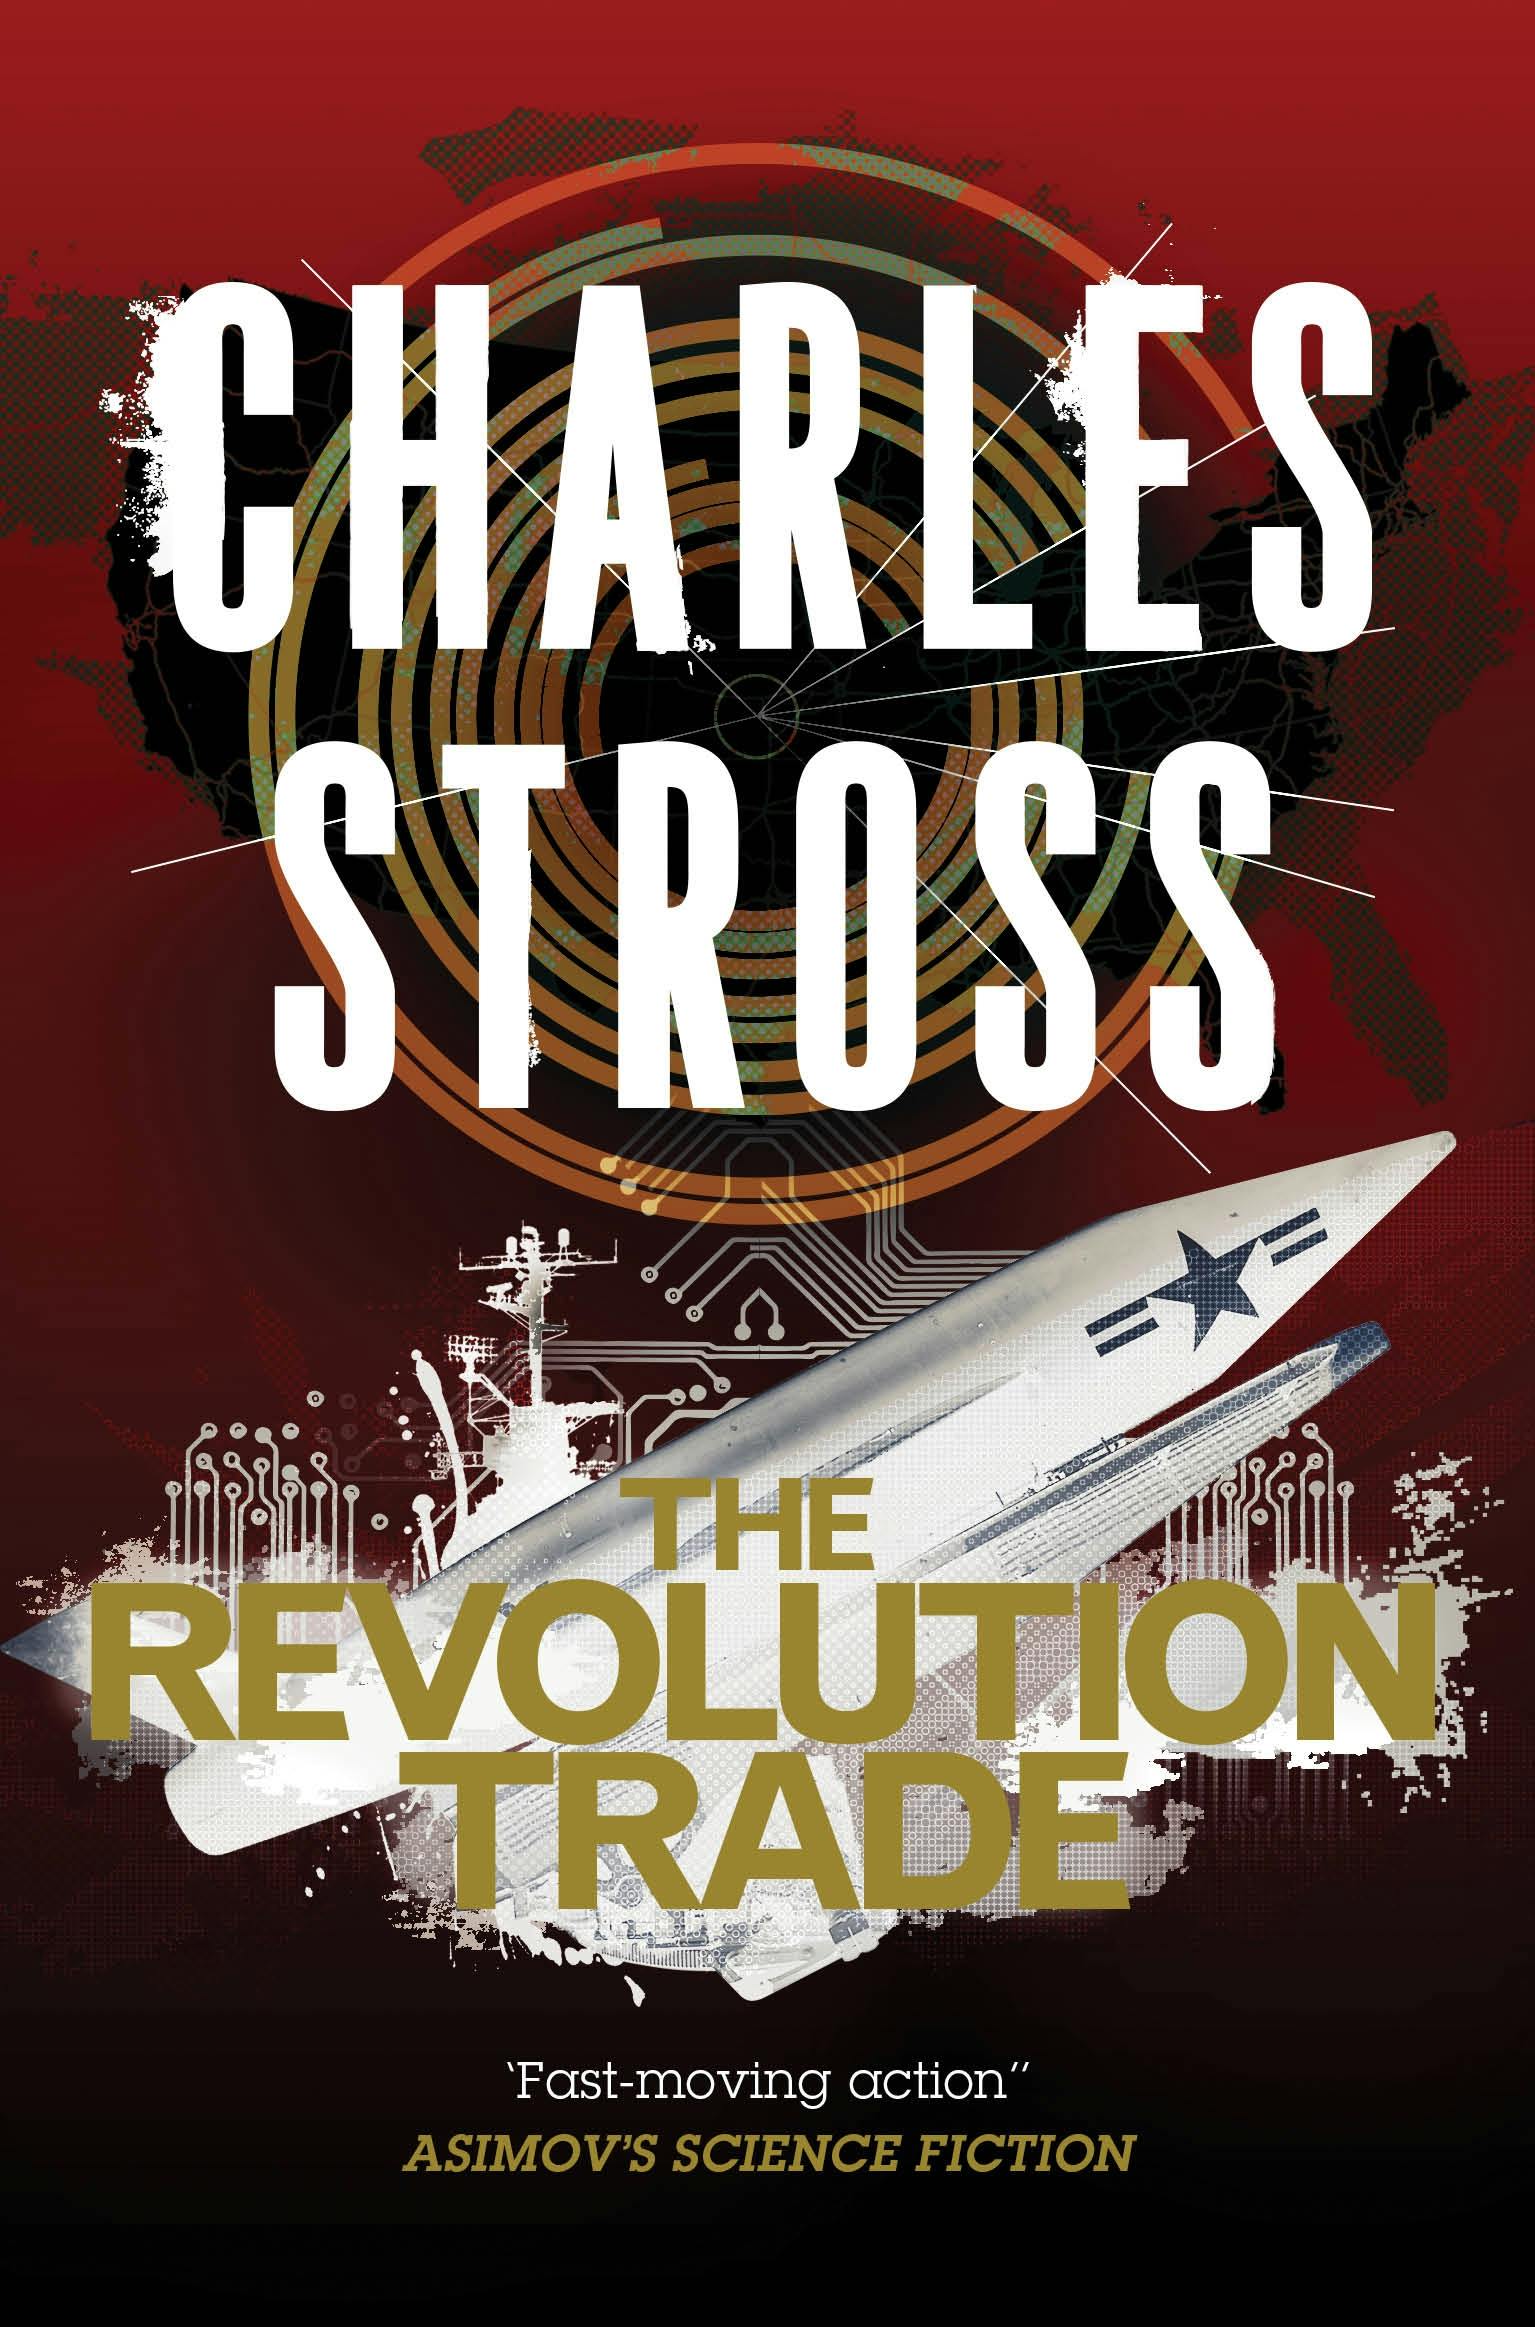 Cover for the book titled as: The Revolution Trade